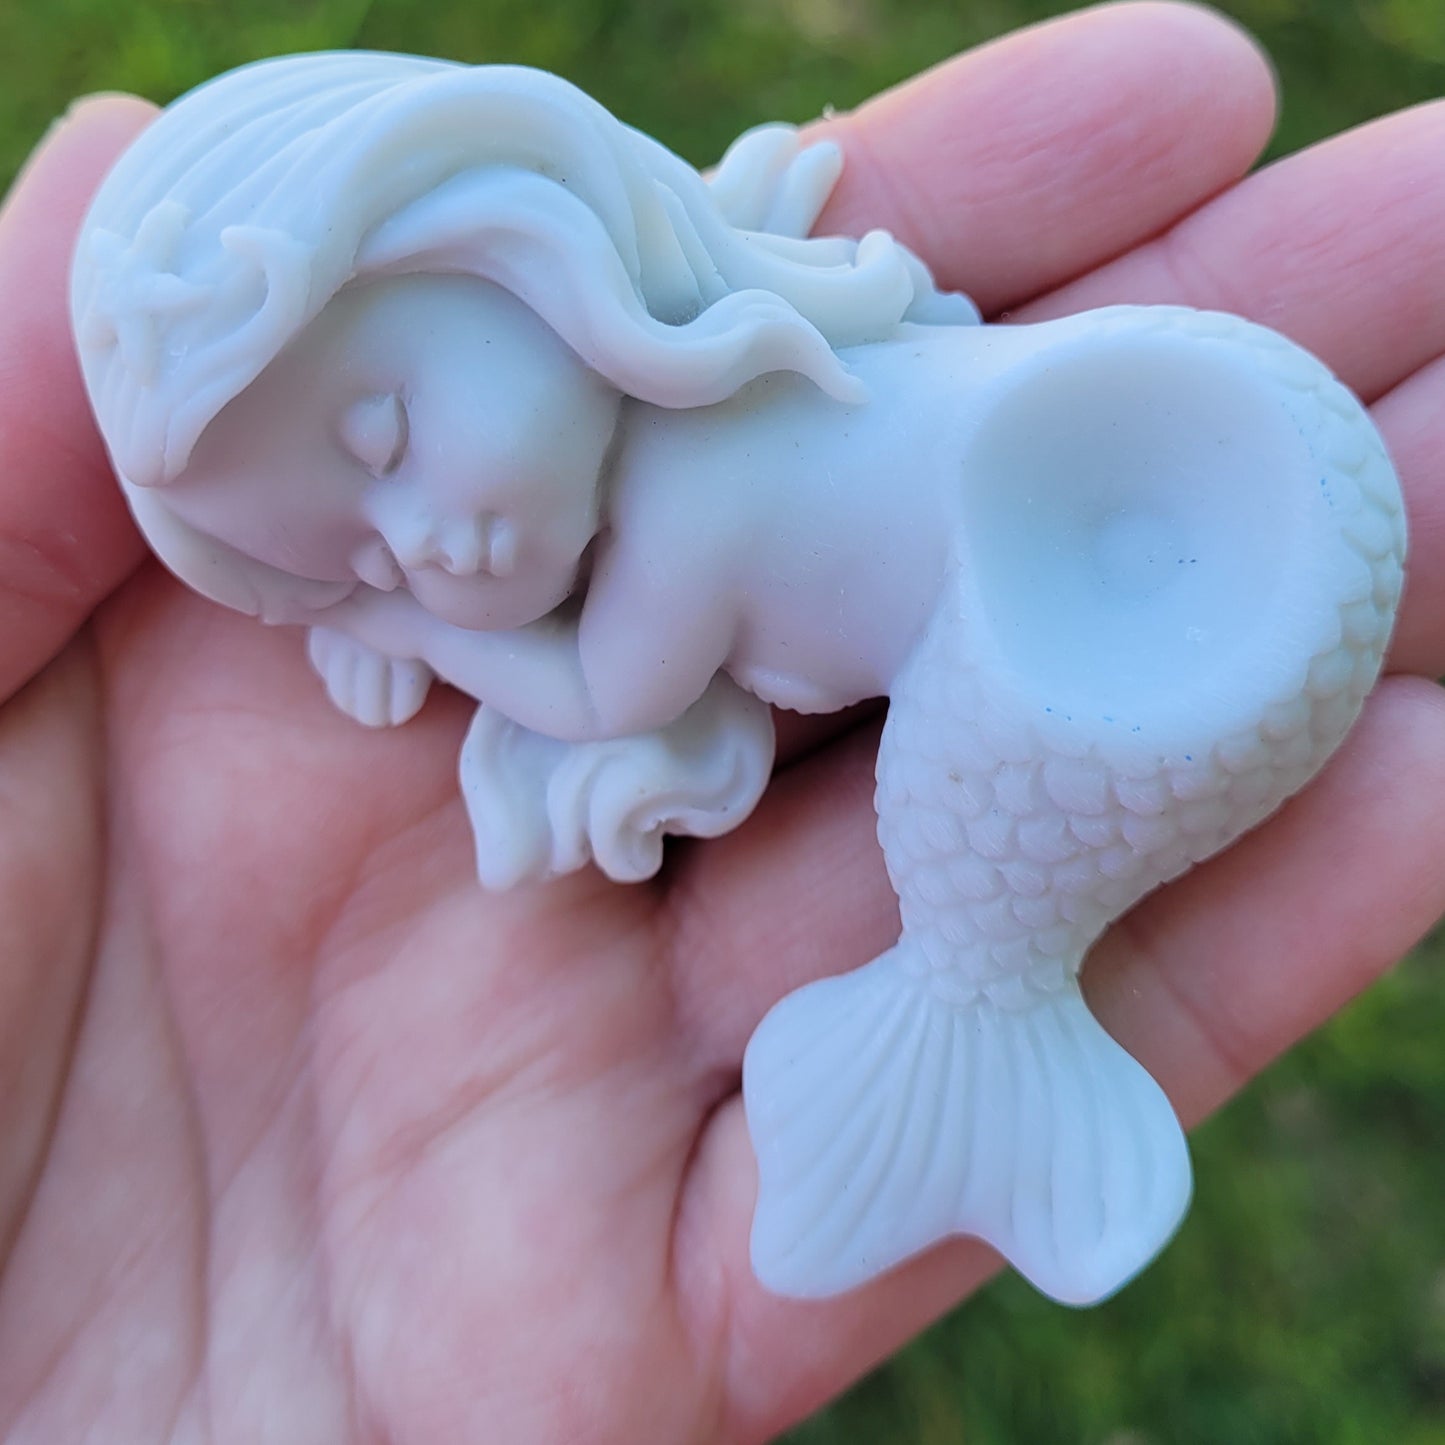 Mermaid Display Stand in White for Spheres, Balls or Eggs 1" to 3" (26mm to 77mm)